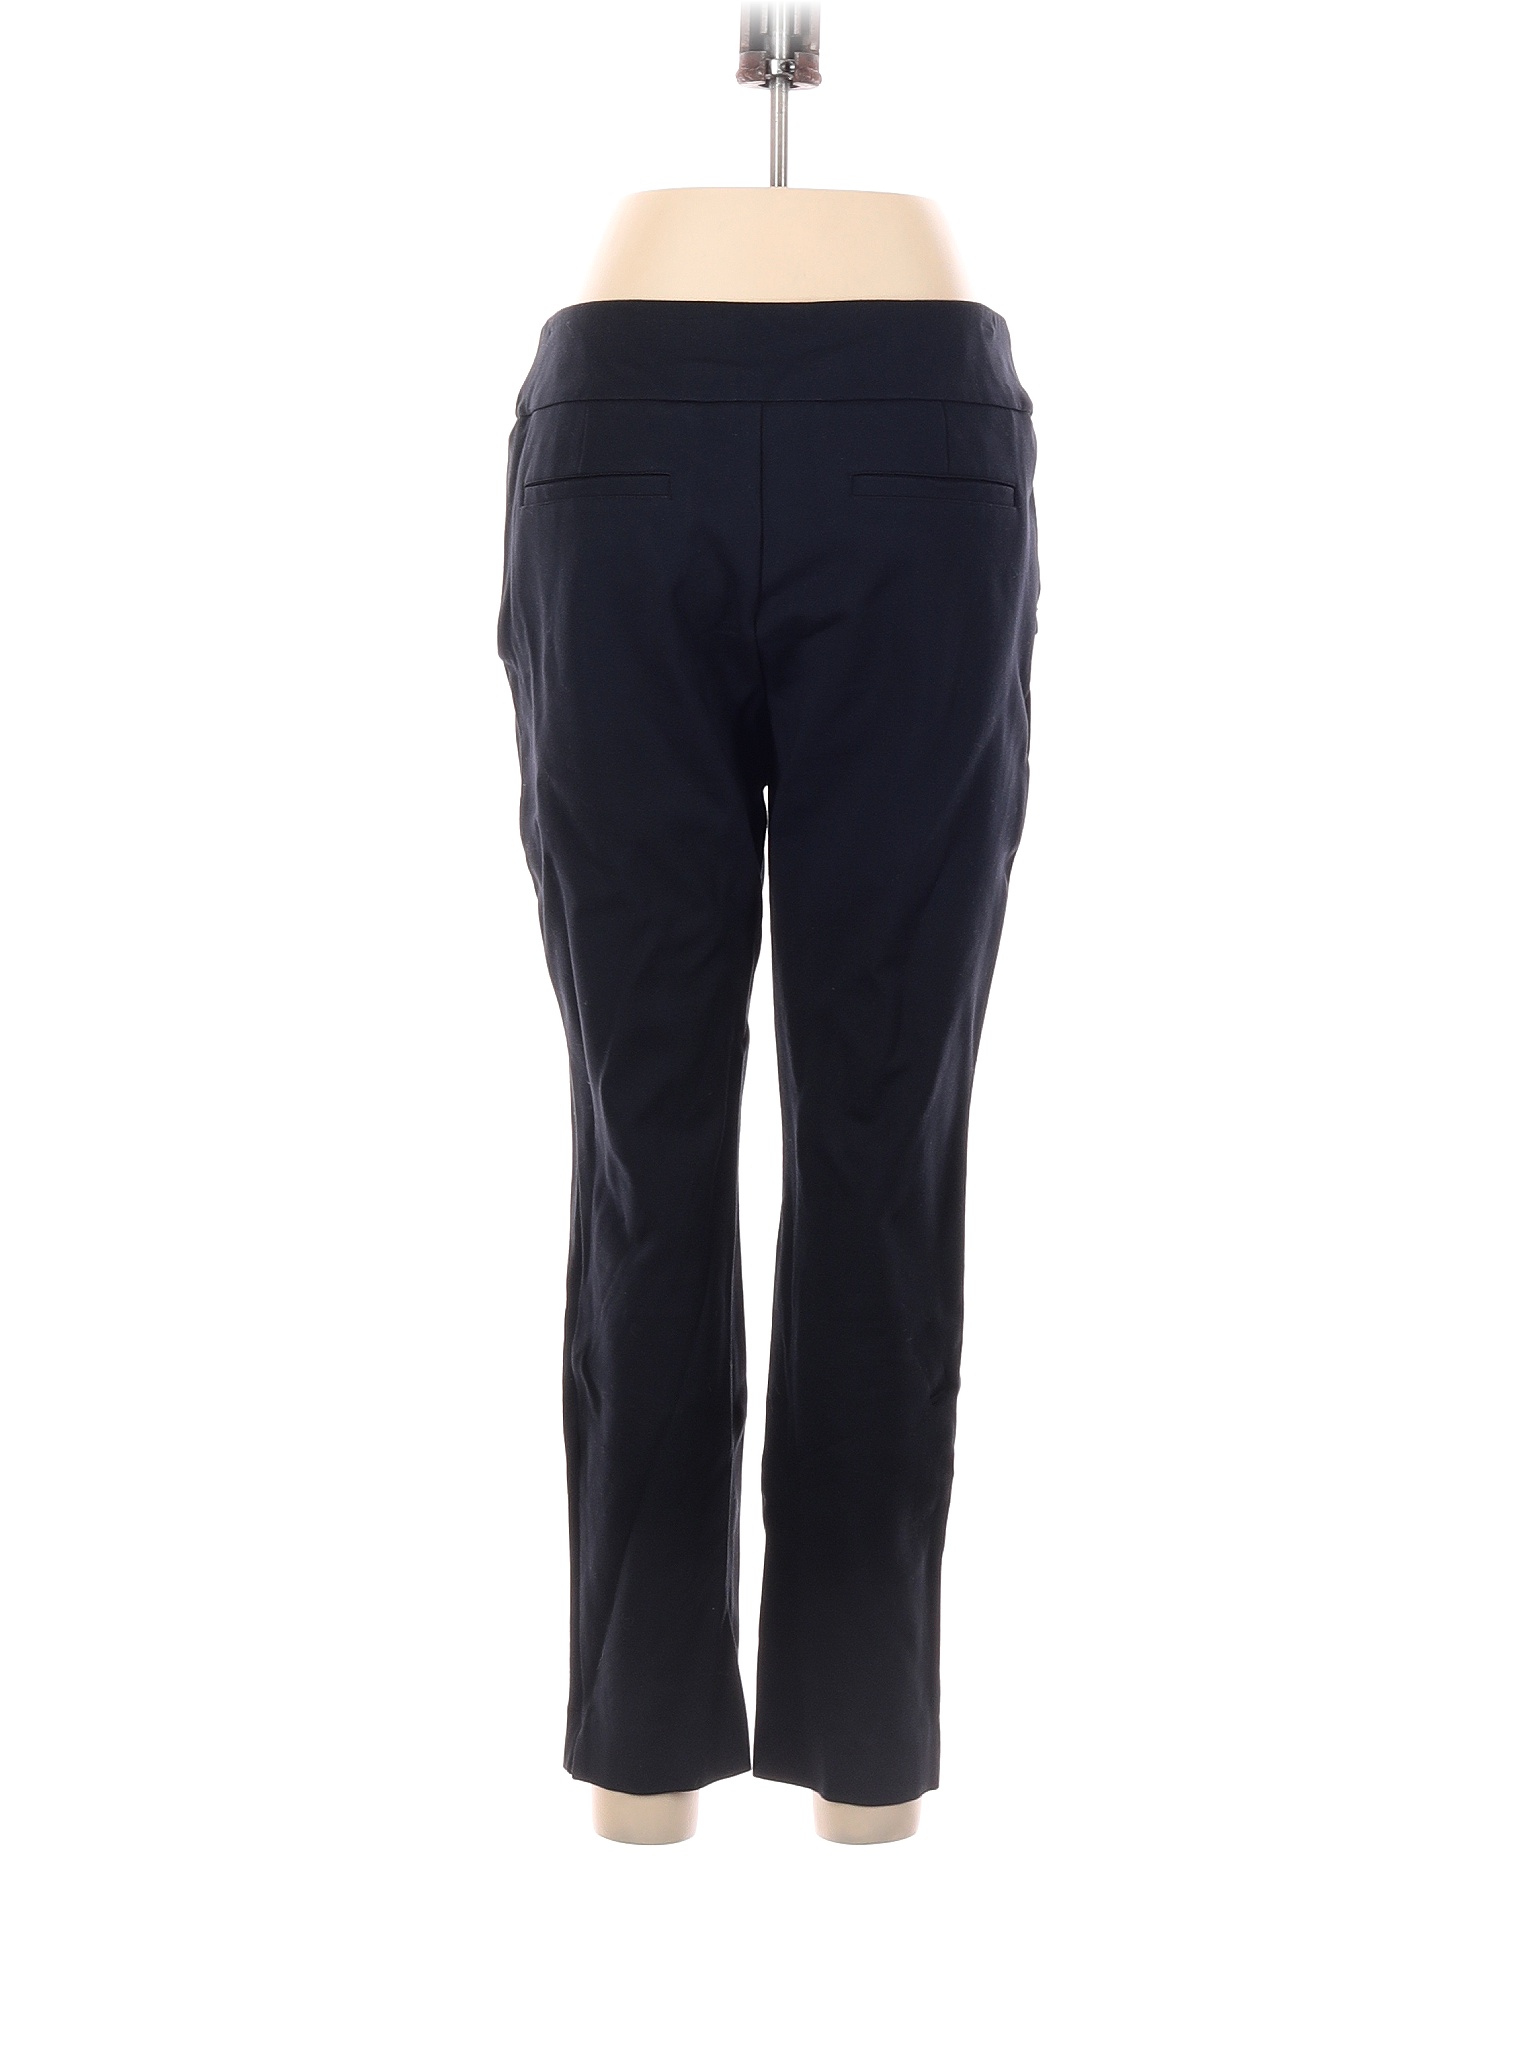 Soft Surroundings Solid Black Casual Pants Size M - 75% off